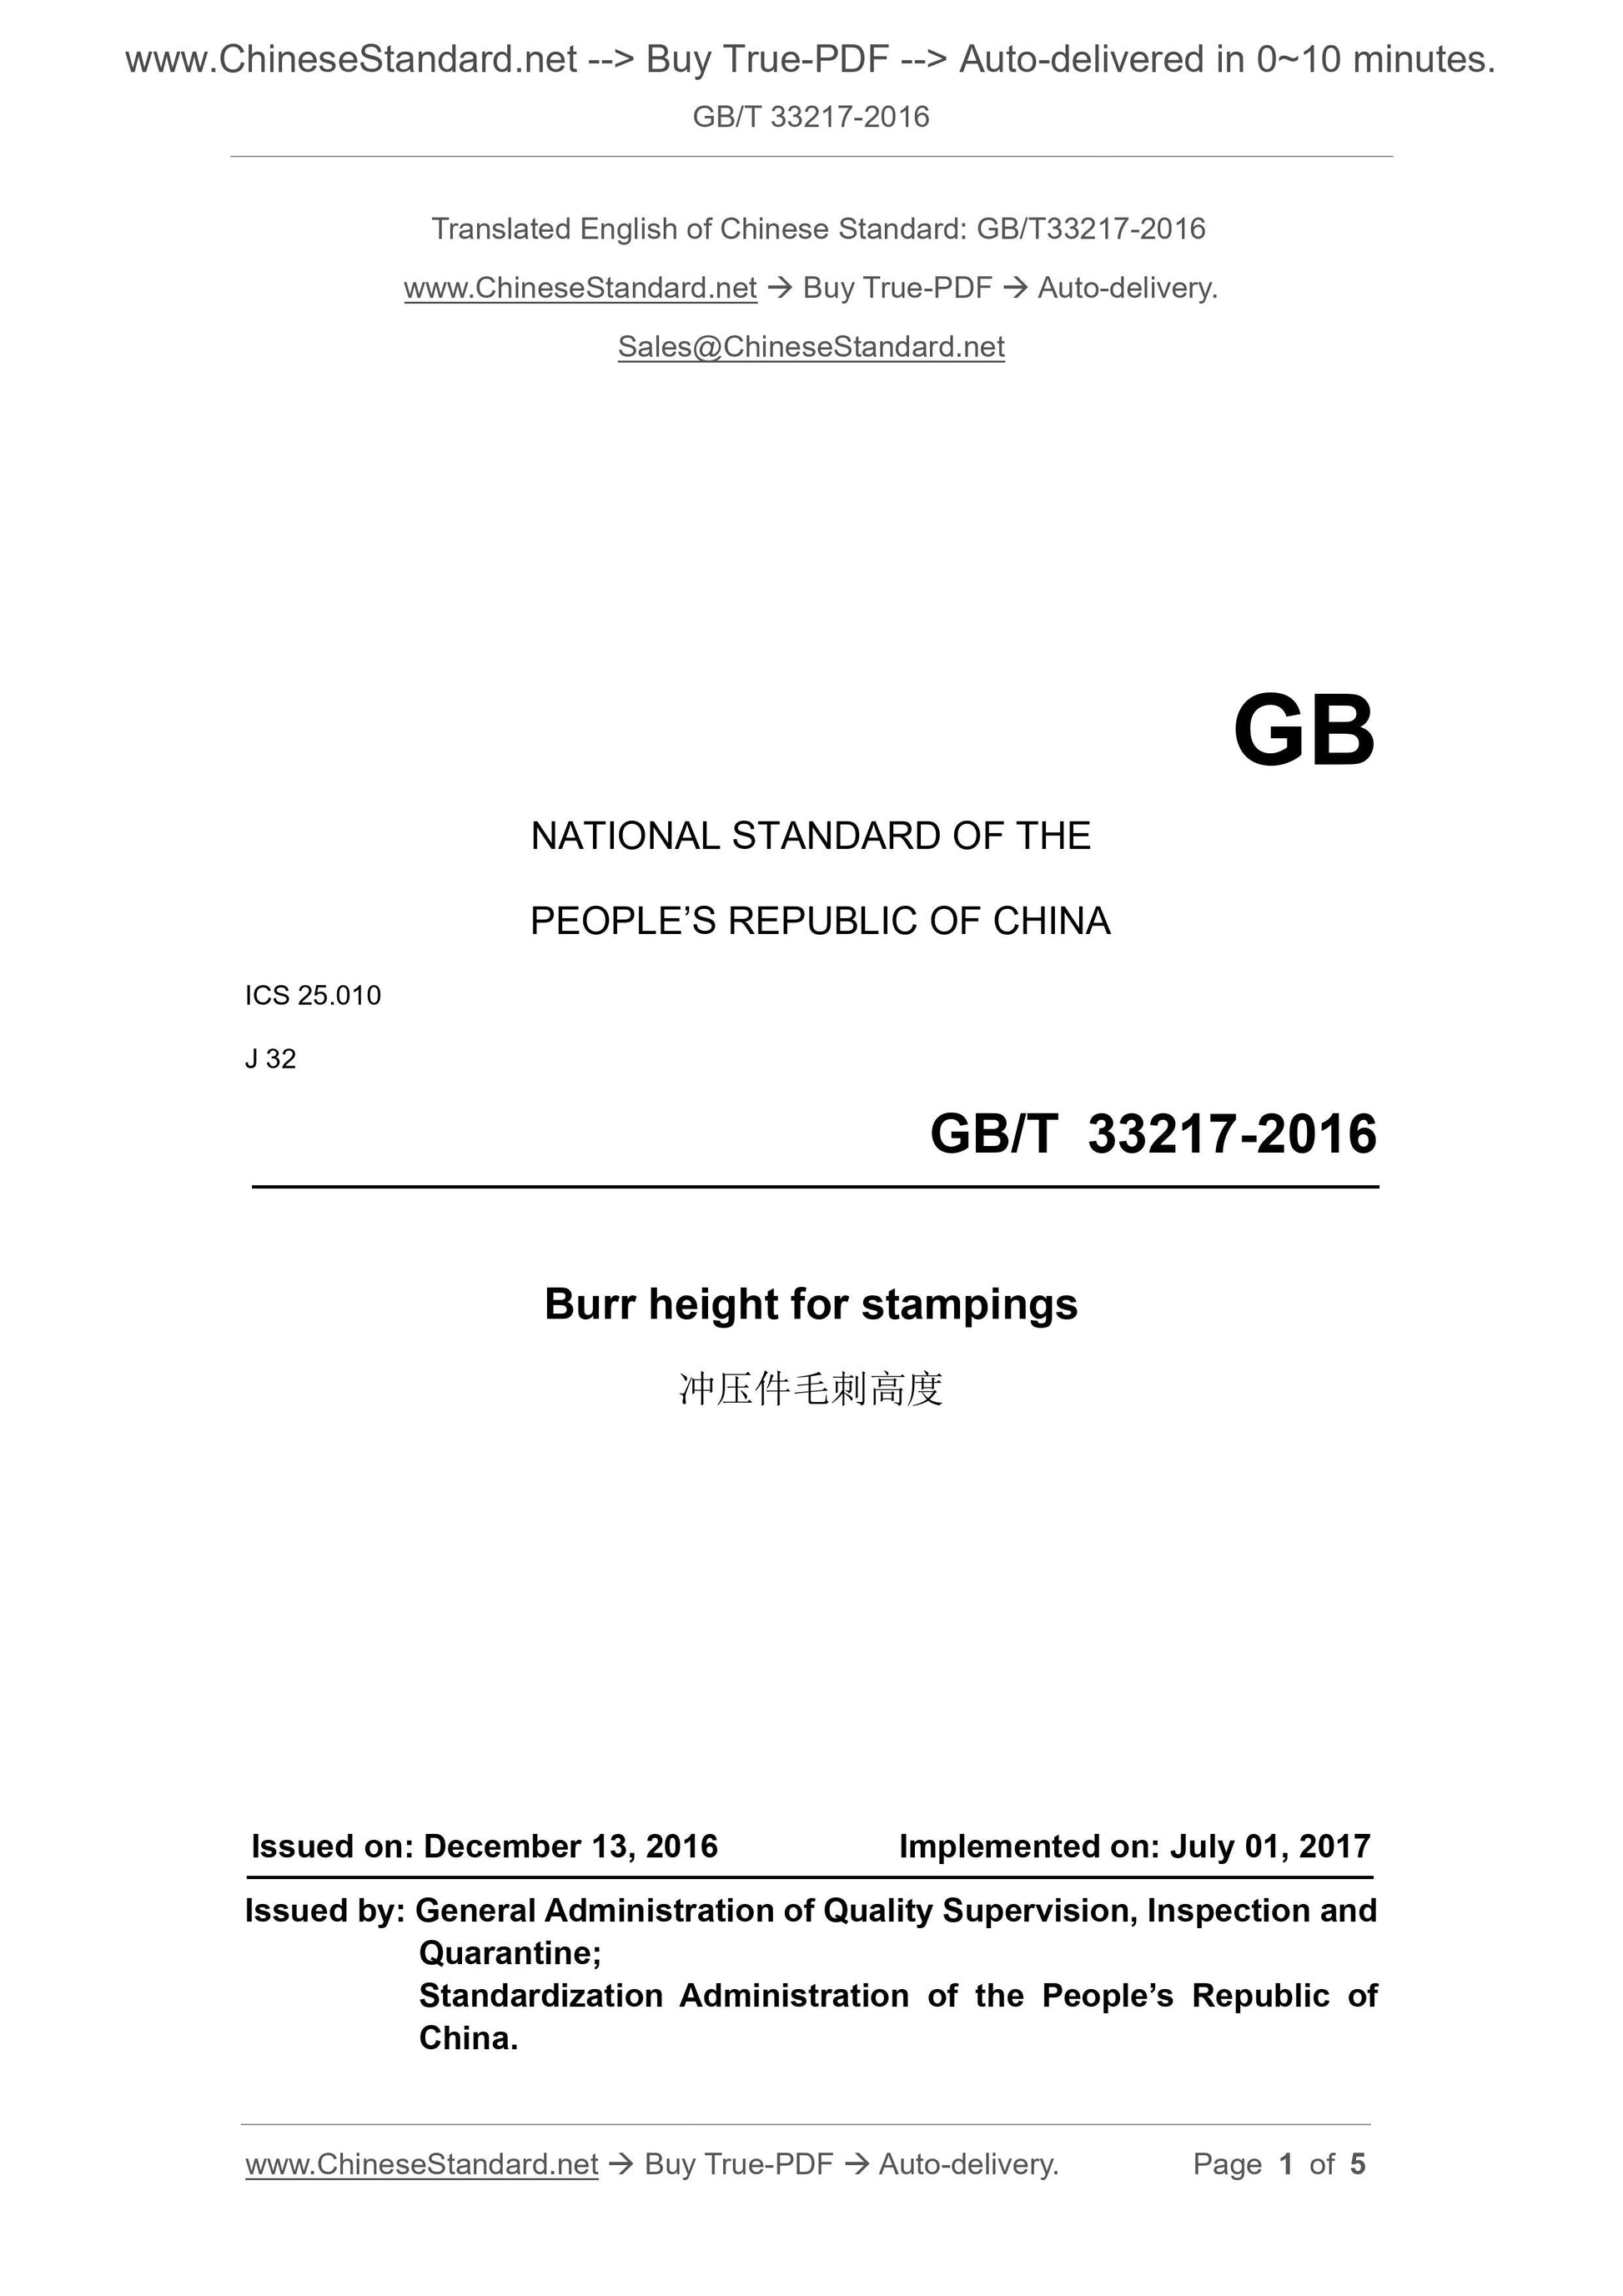 GB/T 33217-2016 Page 1